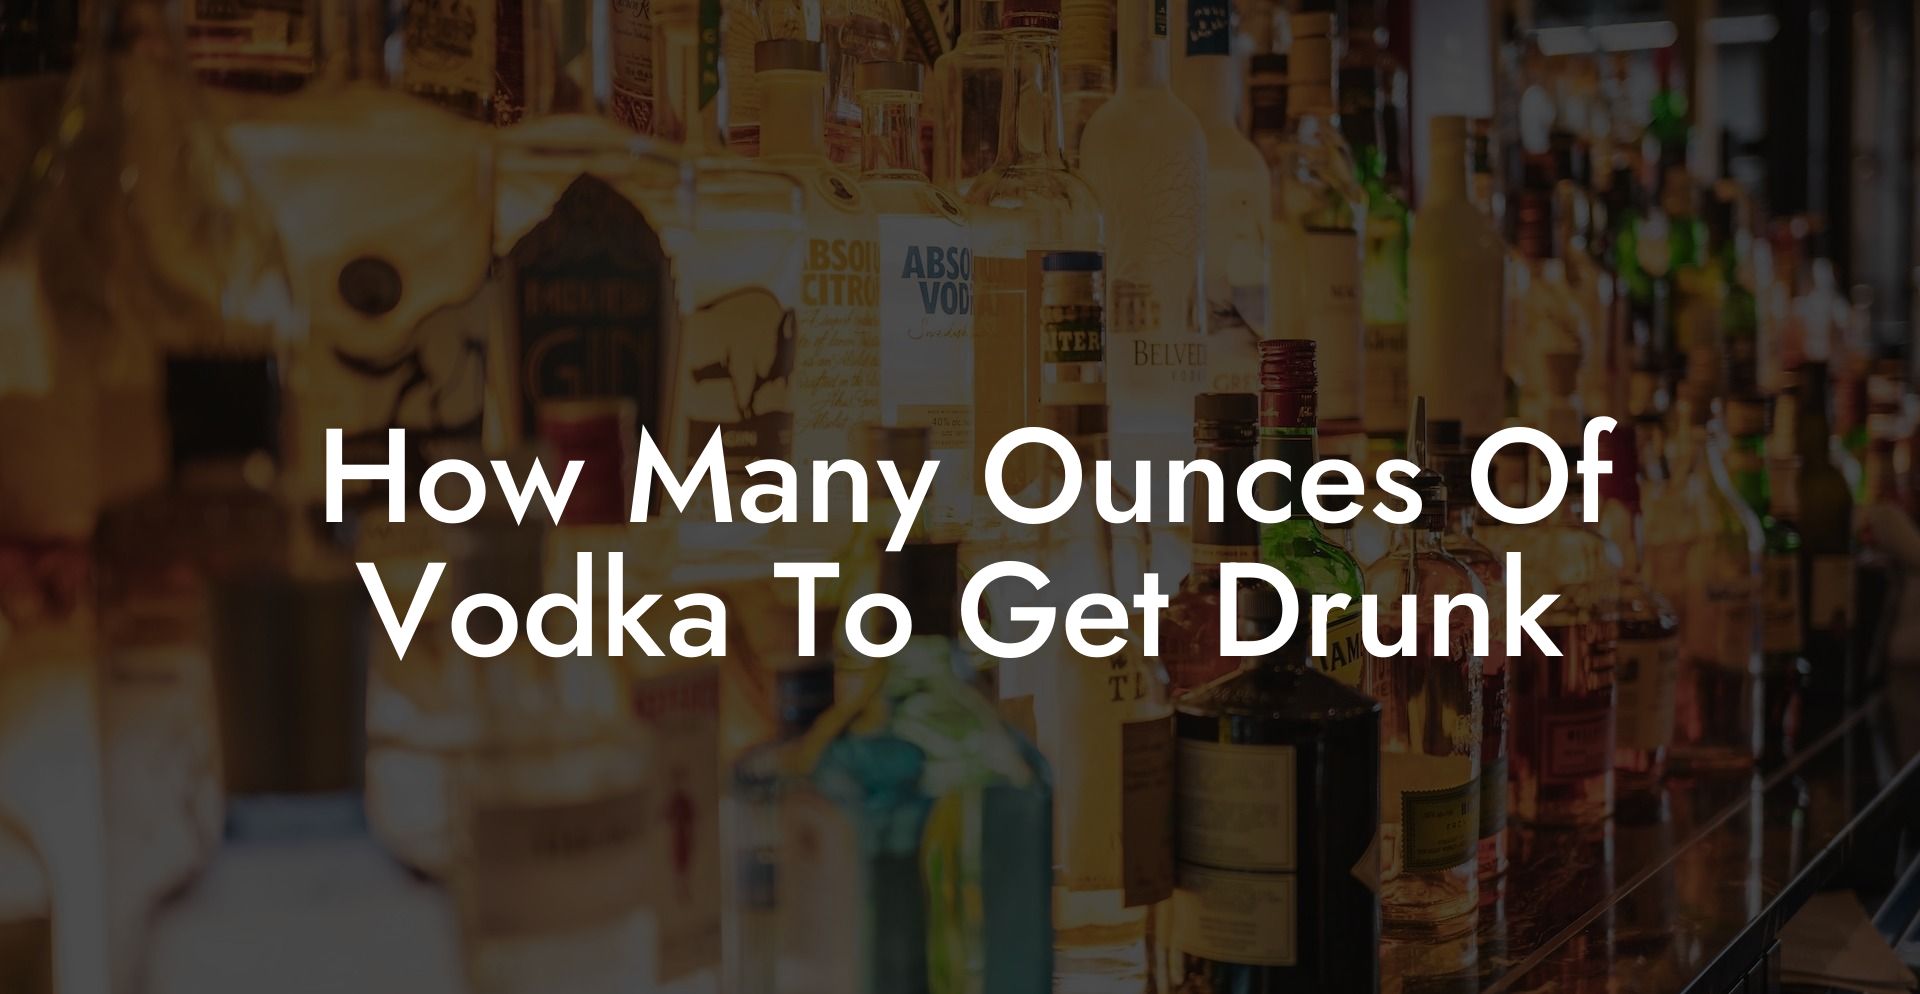 How Many Ounces Of Vodka To Get Drunk